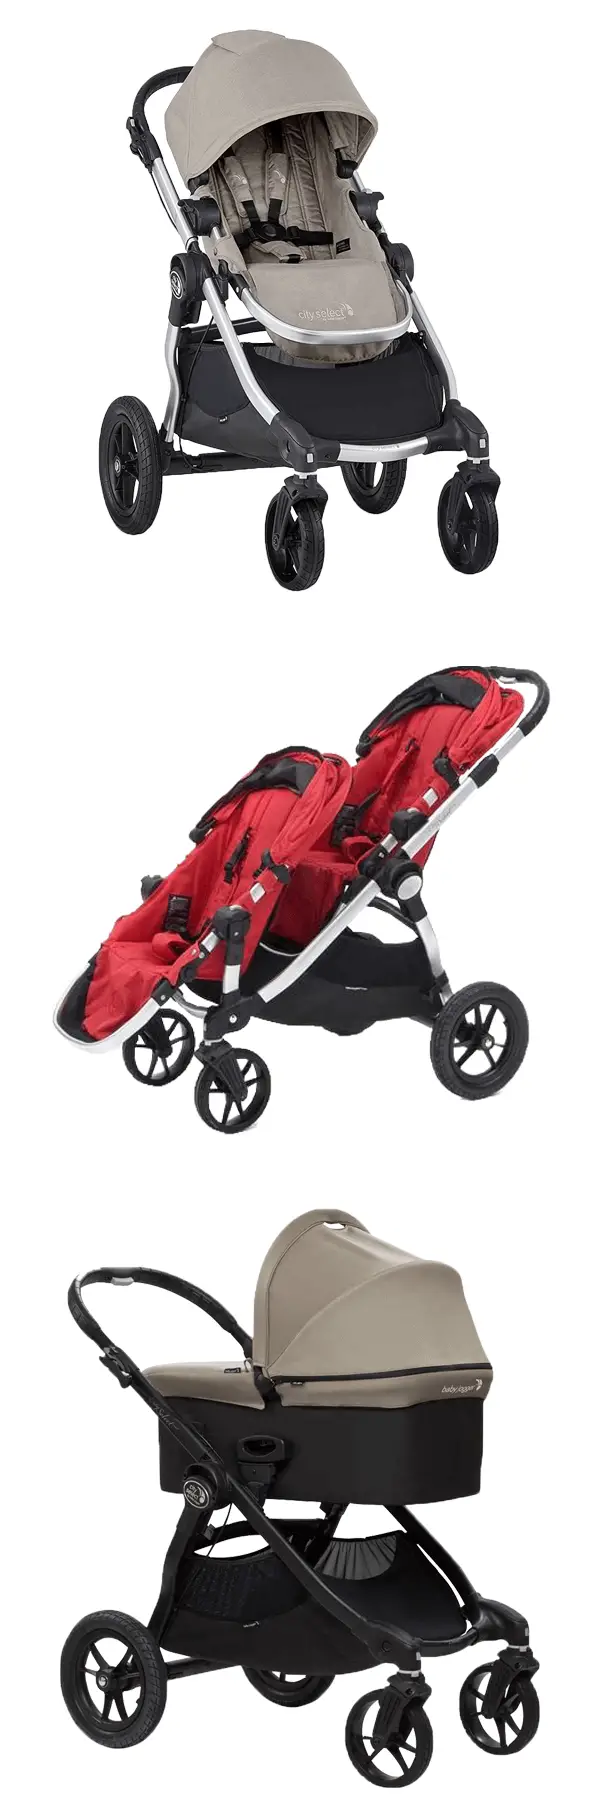 Multiple position configurations of Baby Jogger City Select